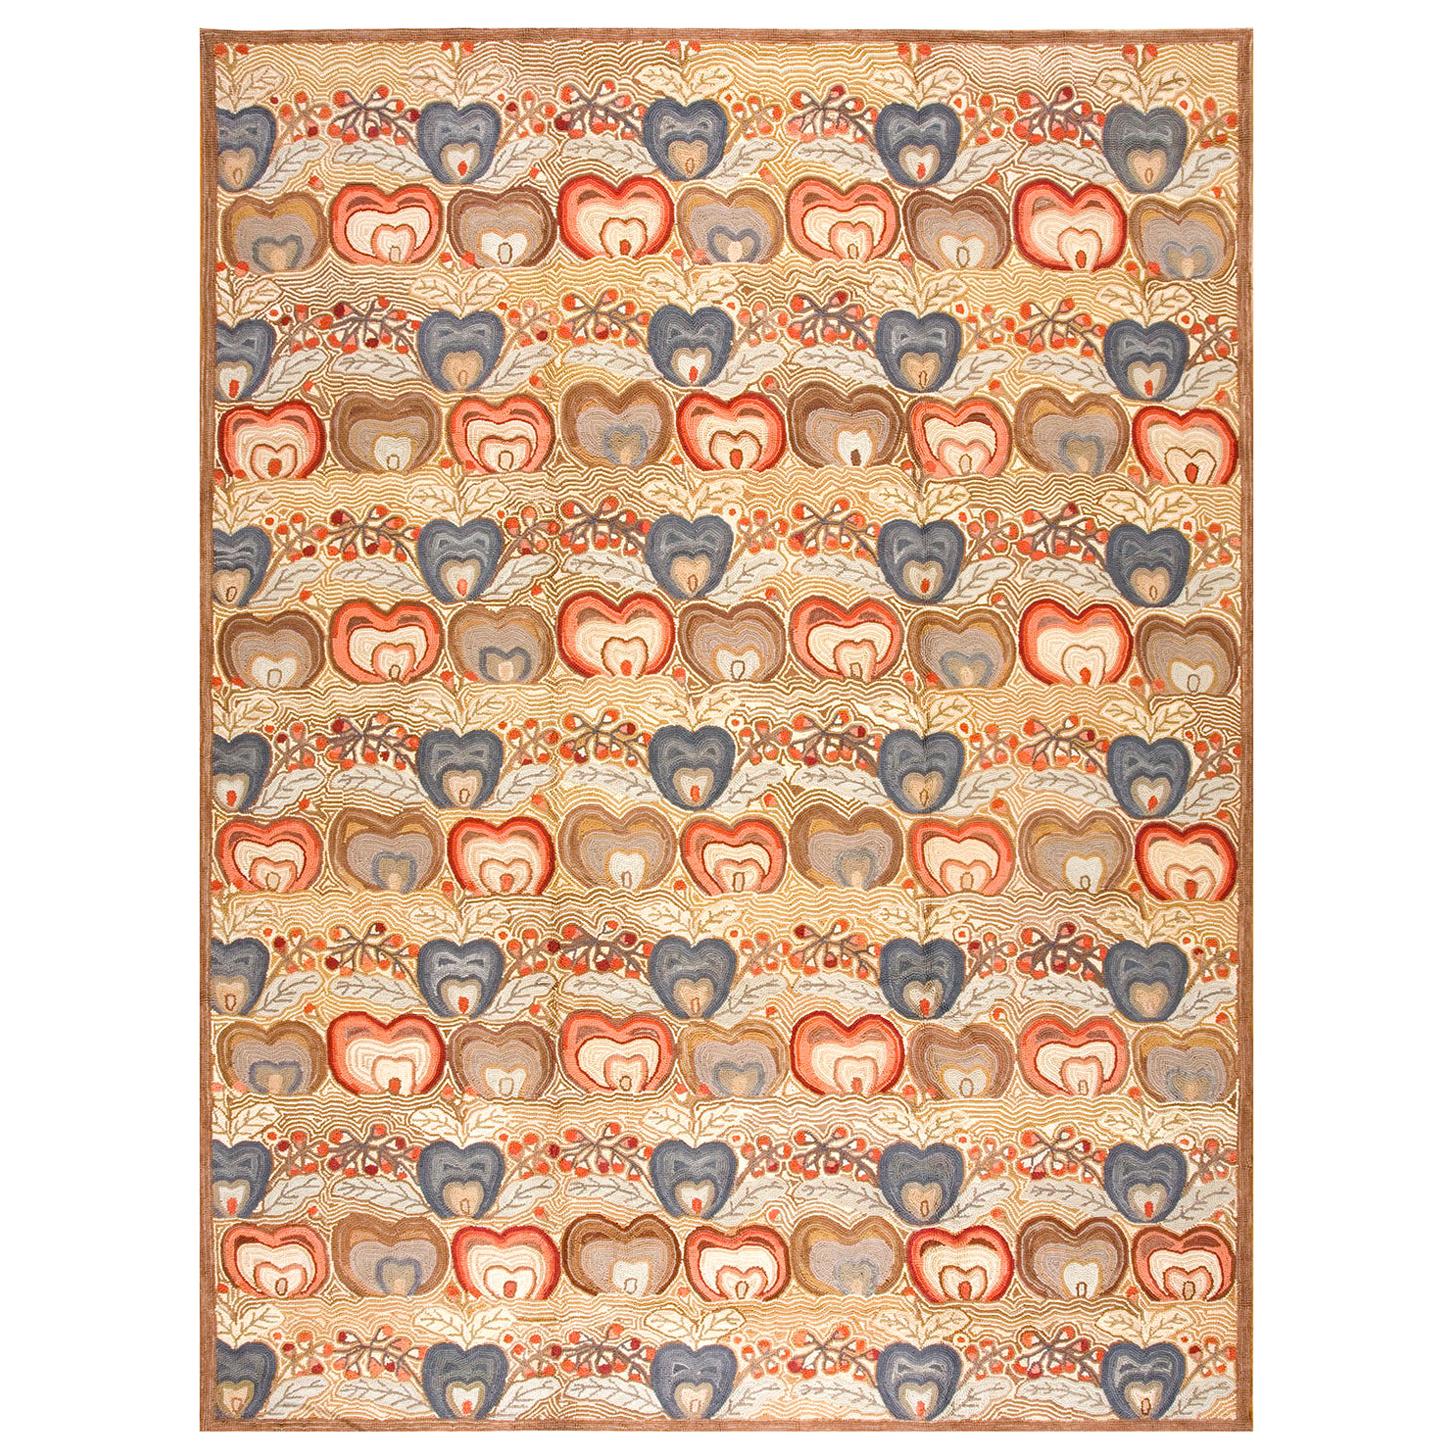 Contemporary American Hooked Rug (10' x 14' - 305x427 )